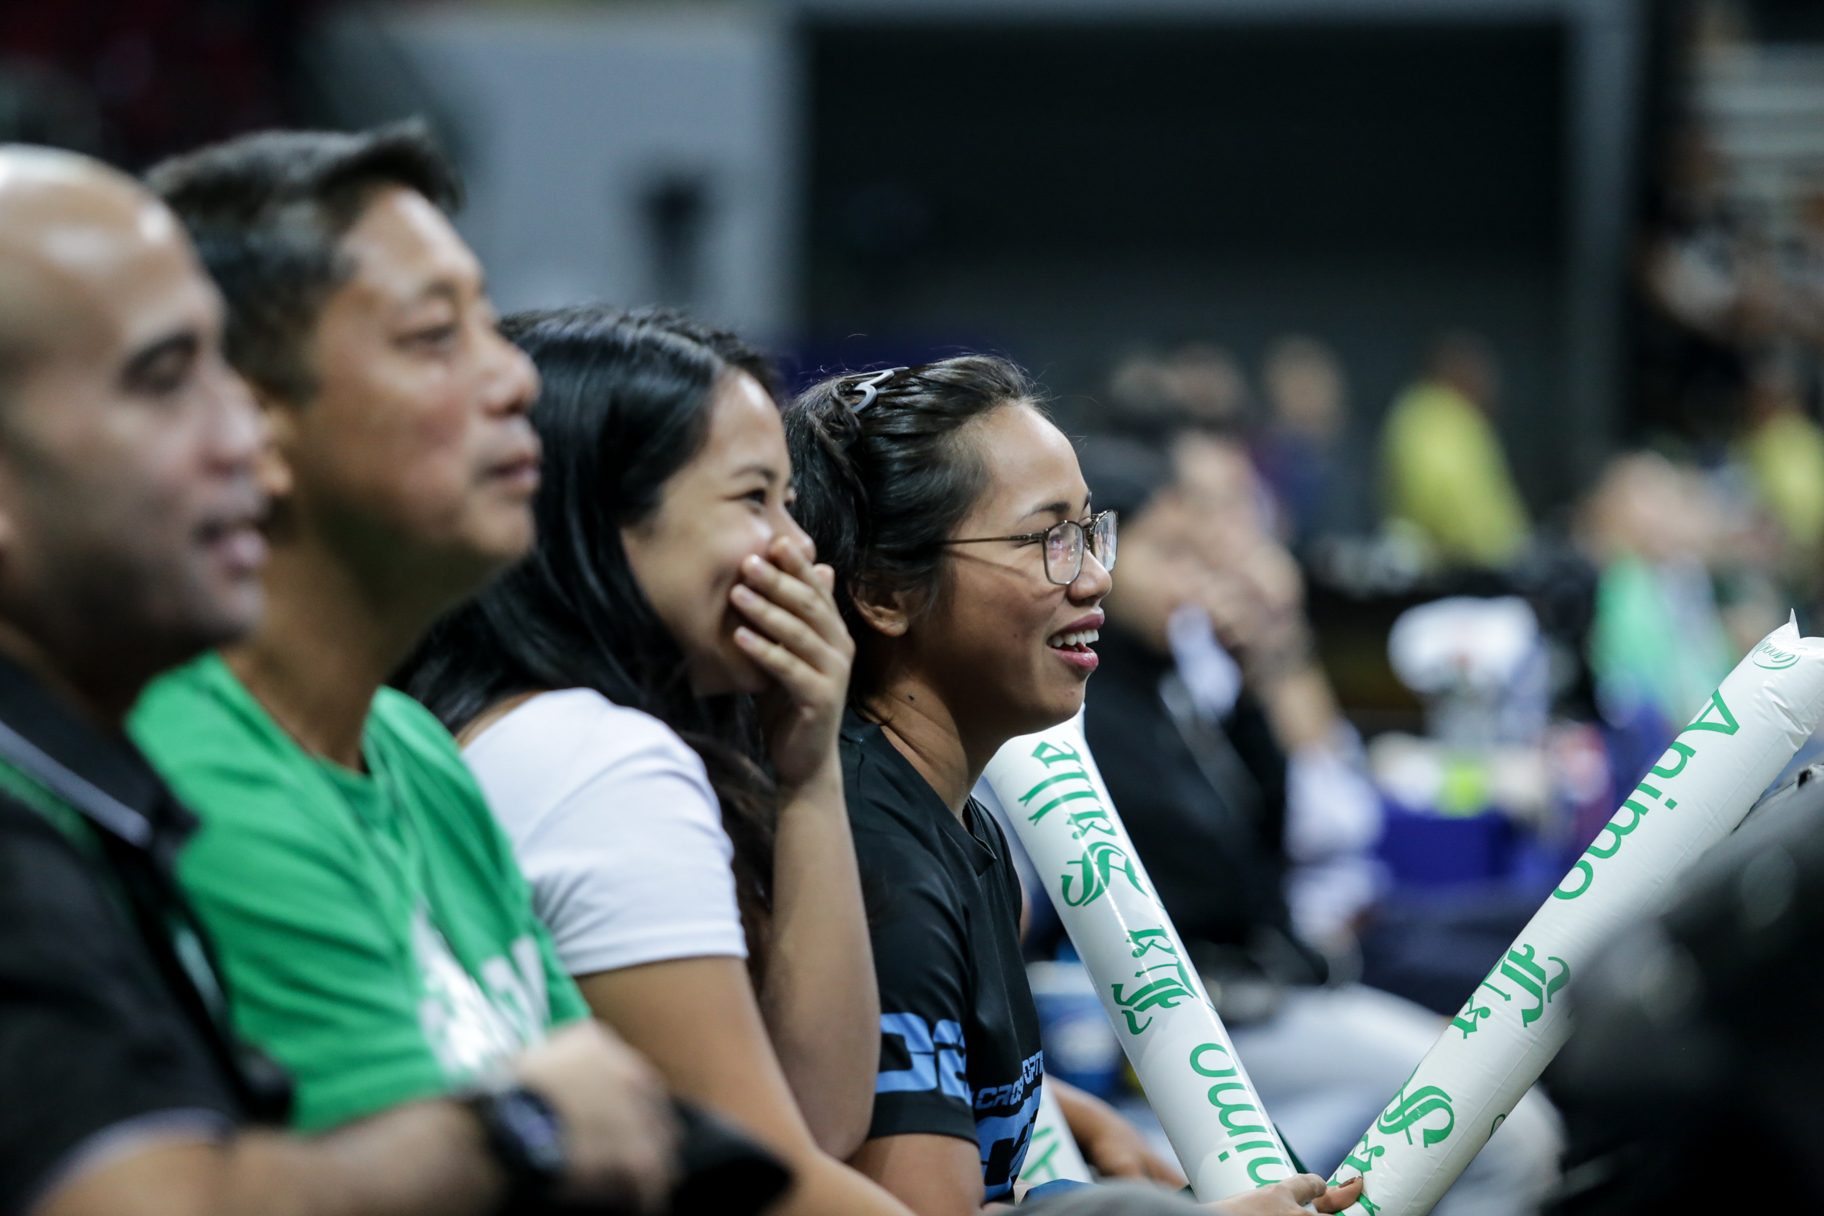 IN PHOTOS: Olympic medalist Hidilyn Diaz watches UAAP live for first time